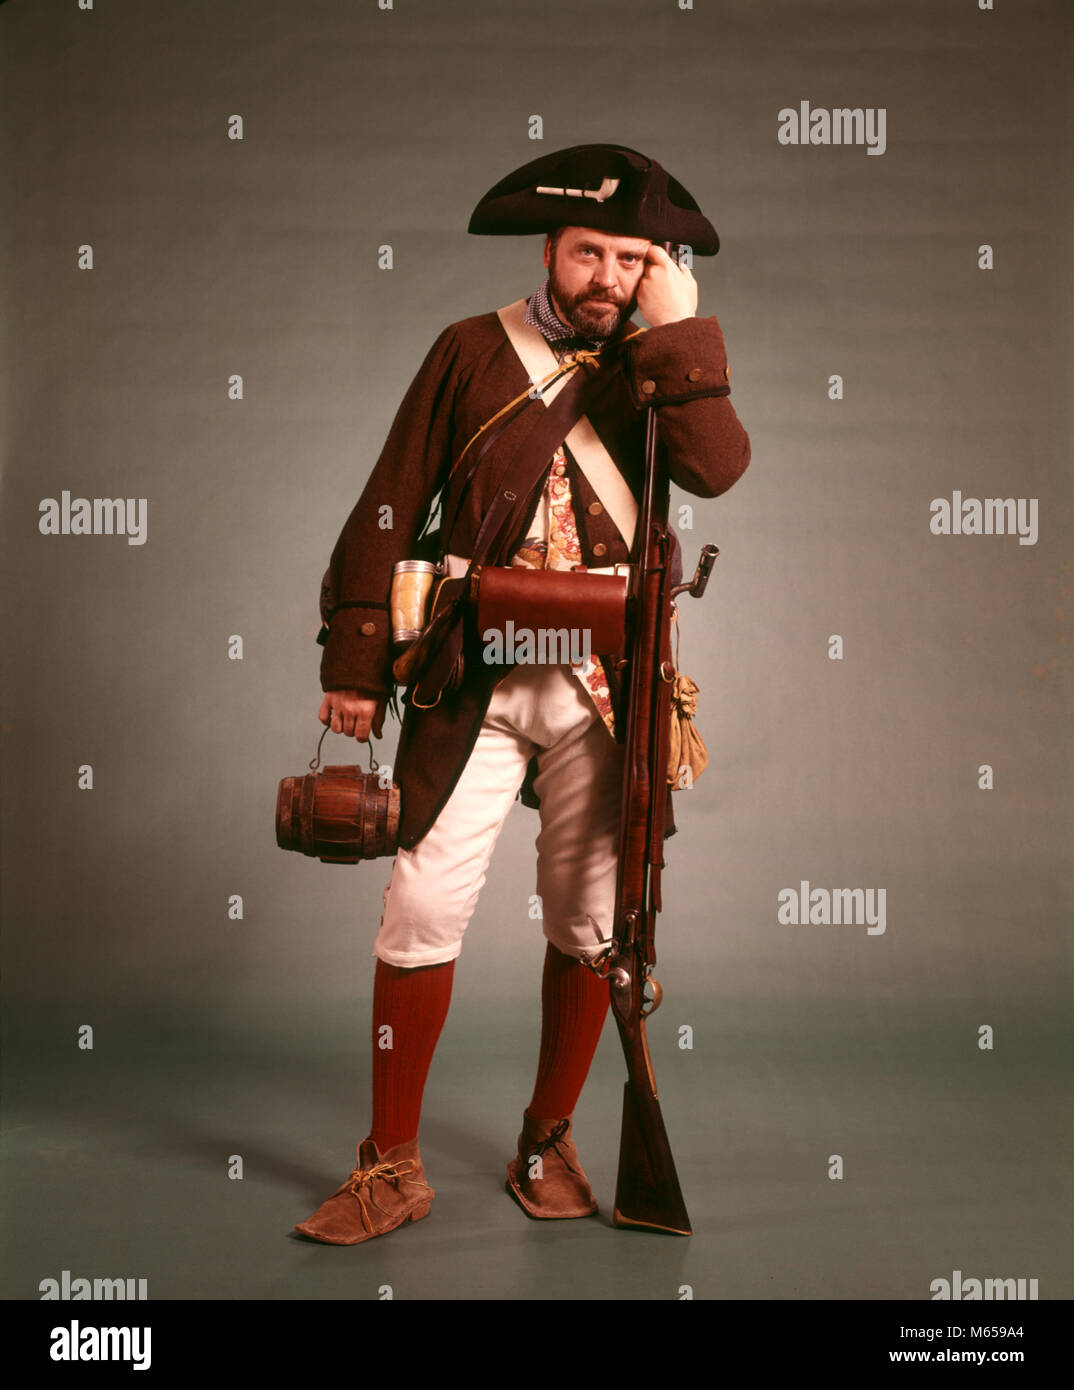 1970s 1776 AMERICAN REVOLUTION HISTORICAL REENACTOR MILITIA SOLDIER TRICORN HAT FLINTLOCK MUSKET AND BAYONET LOOKING AT CAMERA - kc6785 HAR001 HARS ONE PERSON ONLY UNITED STATES FULL-LENGTH RIFLE UNITED STATES OF AMERICA CHARACTER WHISKEY INDOORS ROUGH NOSTALGIA 20-25 YEARS 25-30 YEARS 30-35 YEARS HISTORIC SUCCESS PEOPLE STORY OCCUPATION ADVENTURE HOBBY LEISURE RELAXATION CHARACTERS HOBBIES KNOWLEDGE RECREATION TRICORN OCCASION FLINTLOCK PATRIOT UNIFORMS MUSKET REBELLION REENACTOR REENACTORS ARMED FORCE MUSKETS REENACTING WOOL COAT MALES MINUTEMAN PATRIOTS WHISKY BAYONET BAYONETS CARTRIDGE BOX Stock Photo